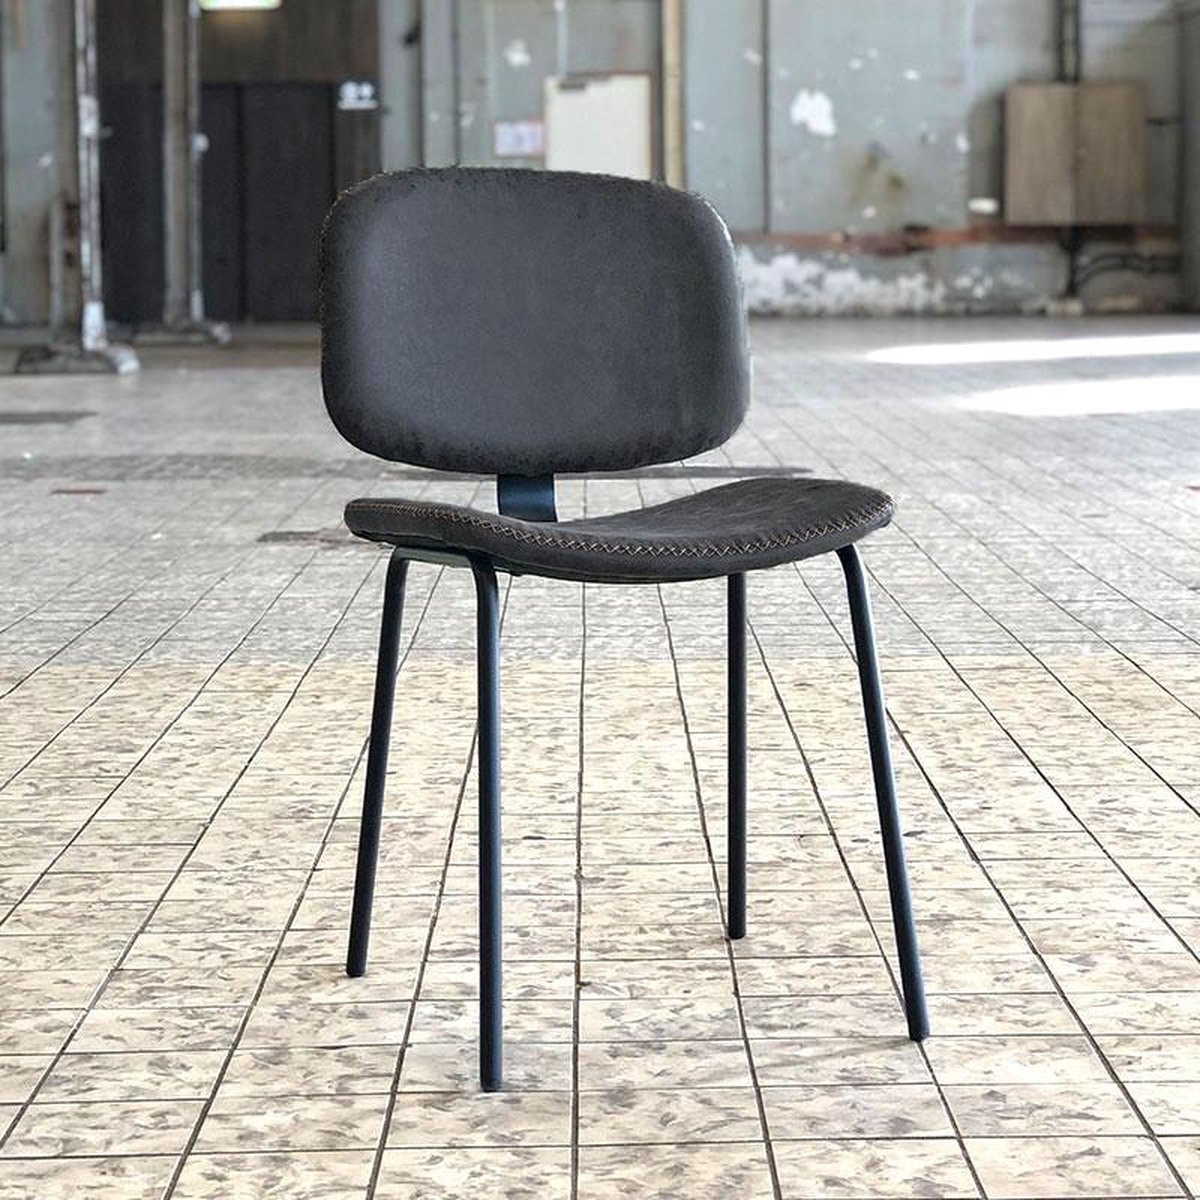 Rent a Dining chair Connect anthracite? Rent at KeyPro furniture rental!